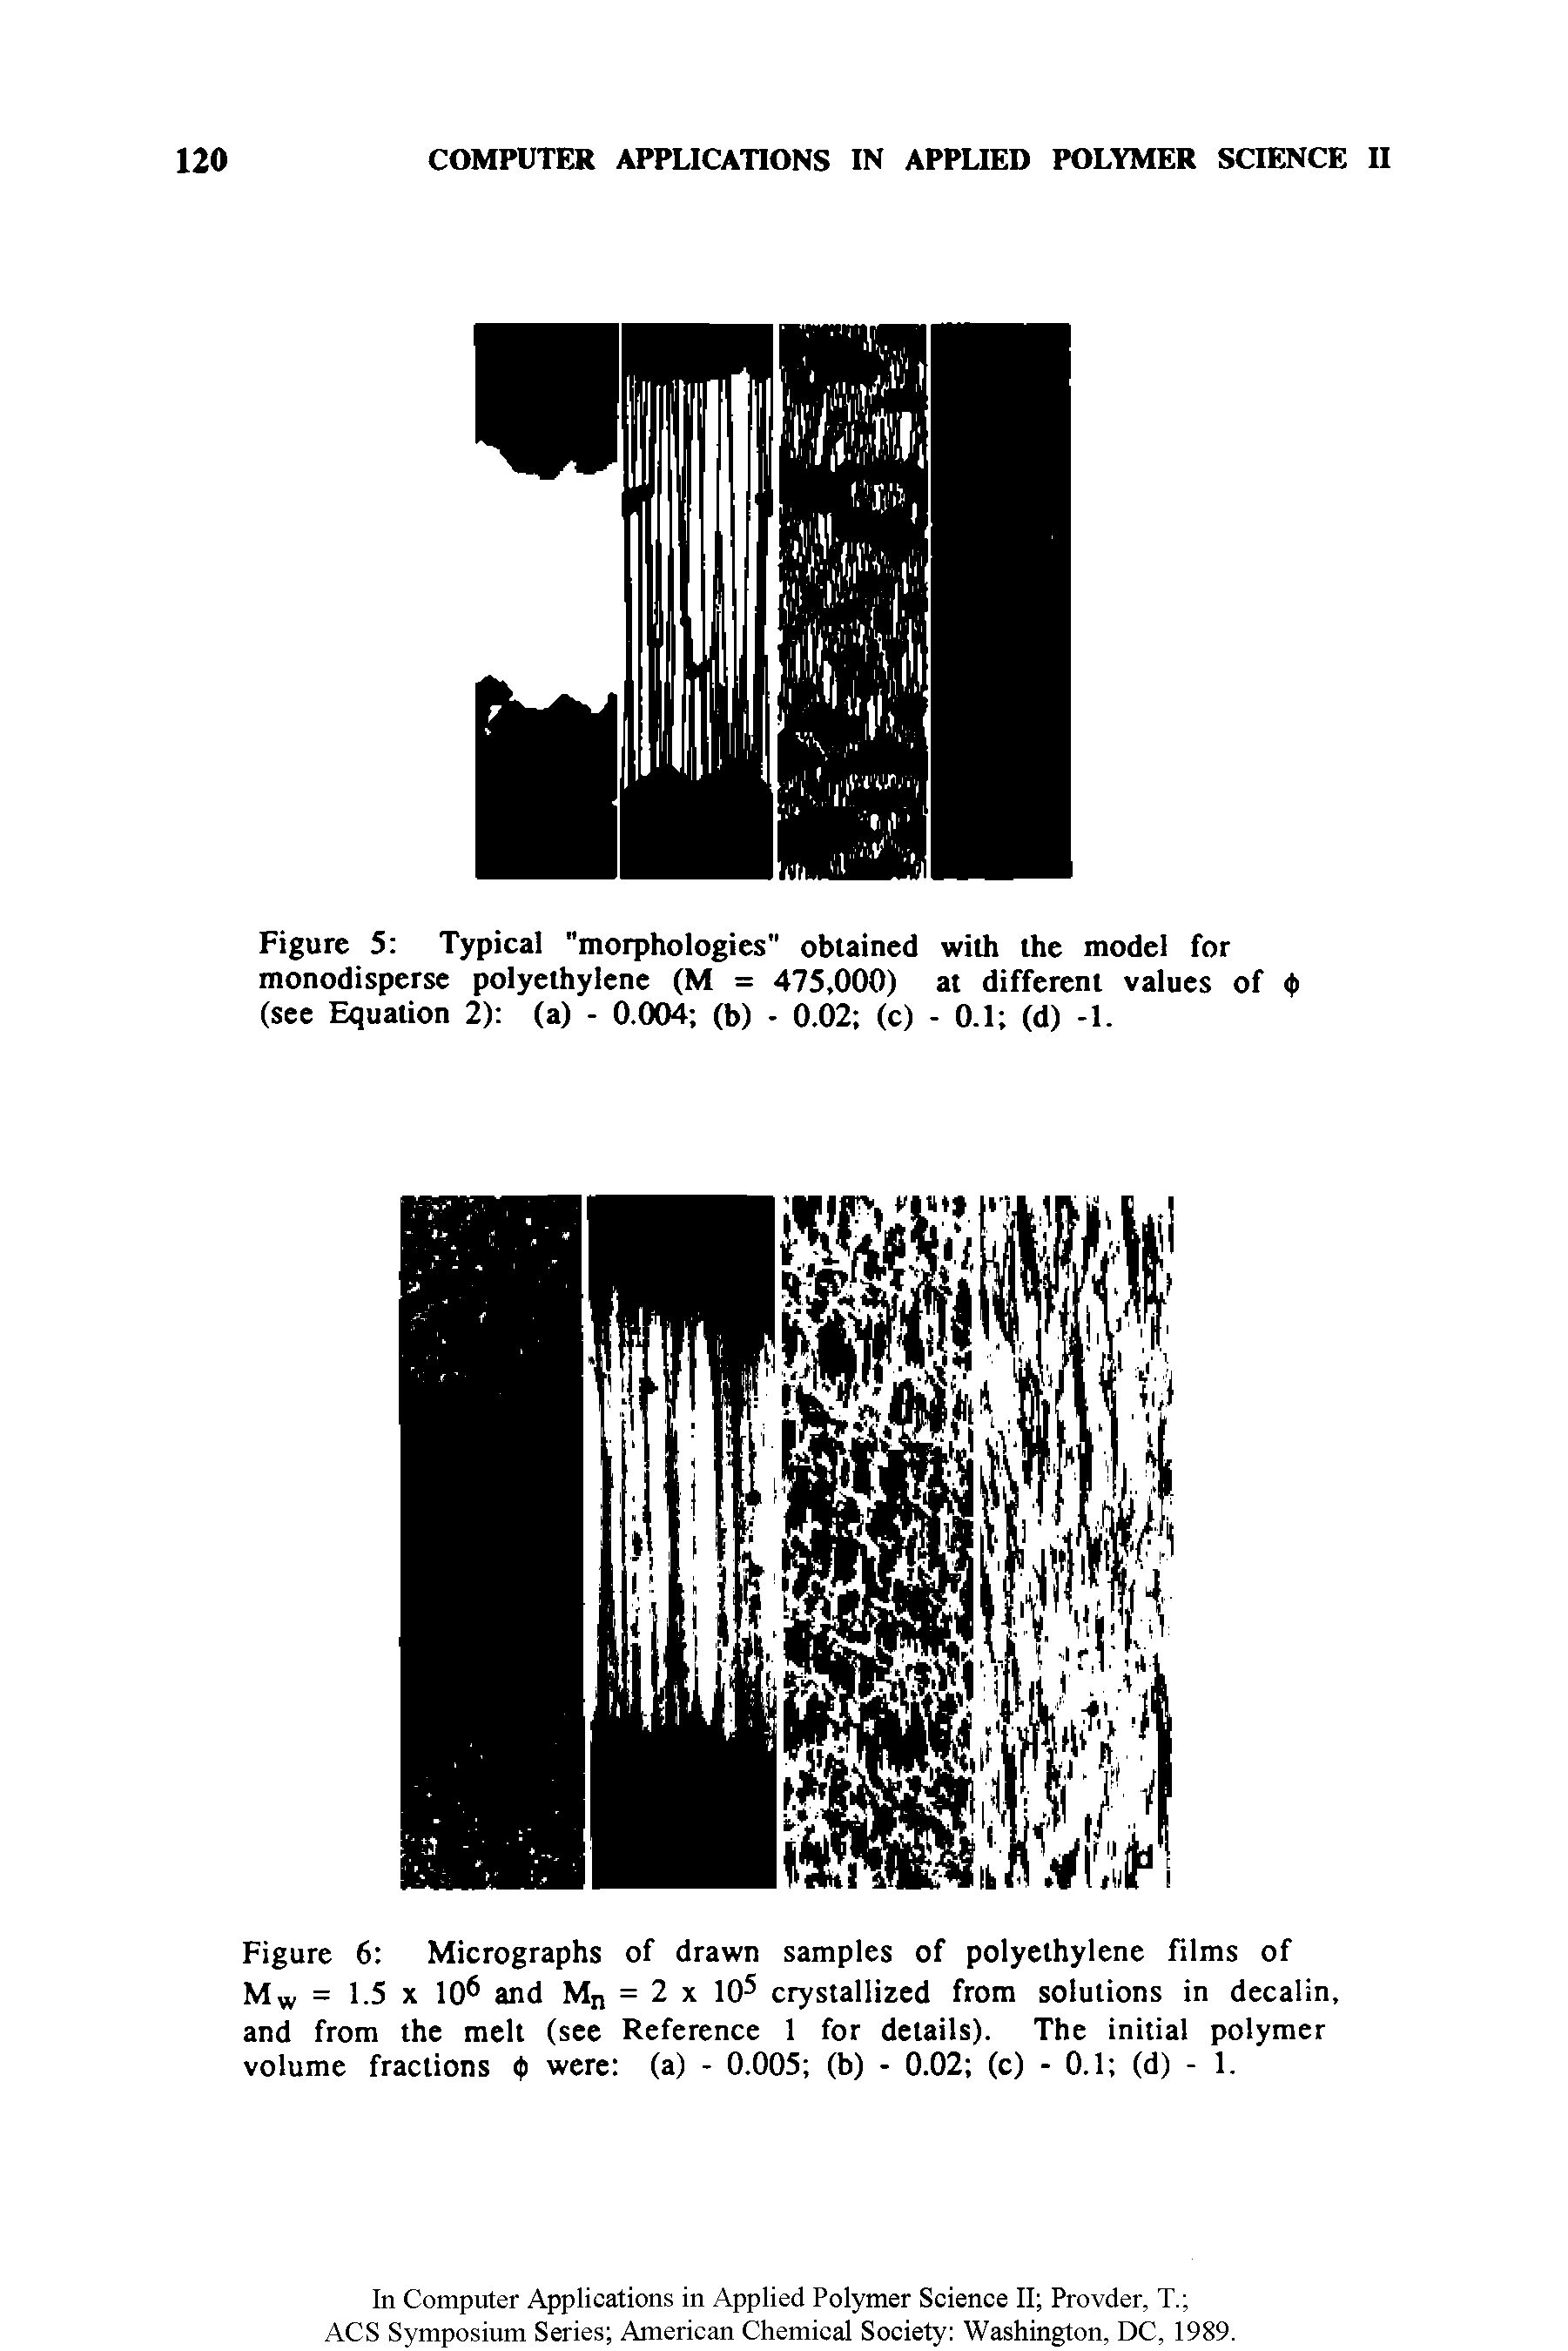 Figure 6 Micrographs of drawn samples of polyethylene films of Mw = 1.5 X 10 and Mn = 2 x 10 crystallized from solutions in decalin, and from the melt (see Reference 1 for details). The initial polymer volume fractions were (a) - 0.005 (b) - 0.02 (c) - 0.1 (d) - 1.